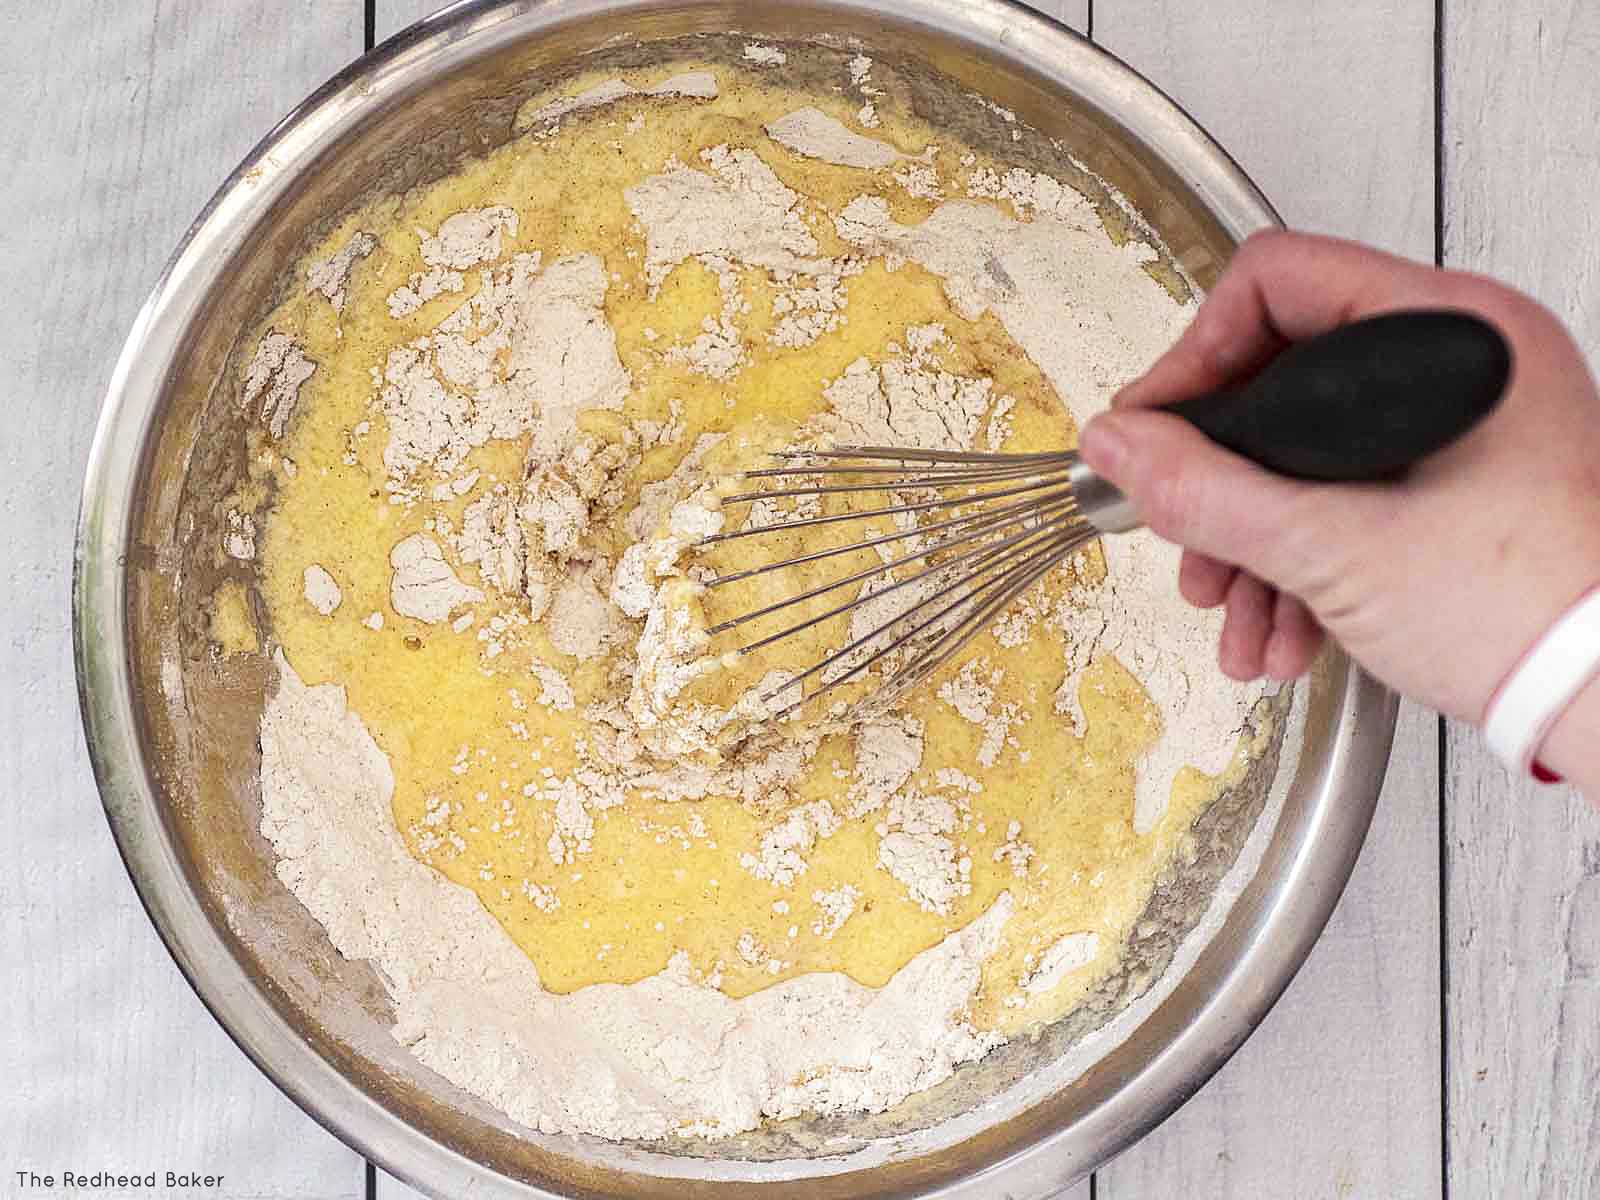 Mixing the wet and dry ingredients with a whisk.